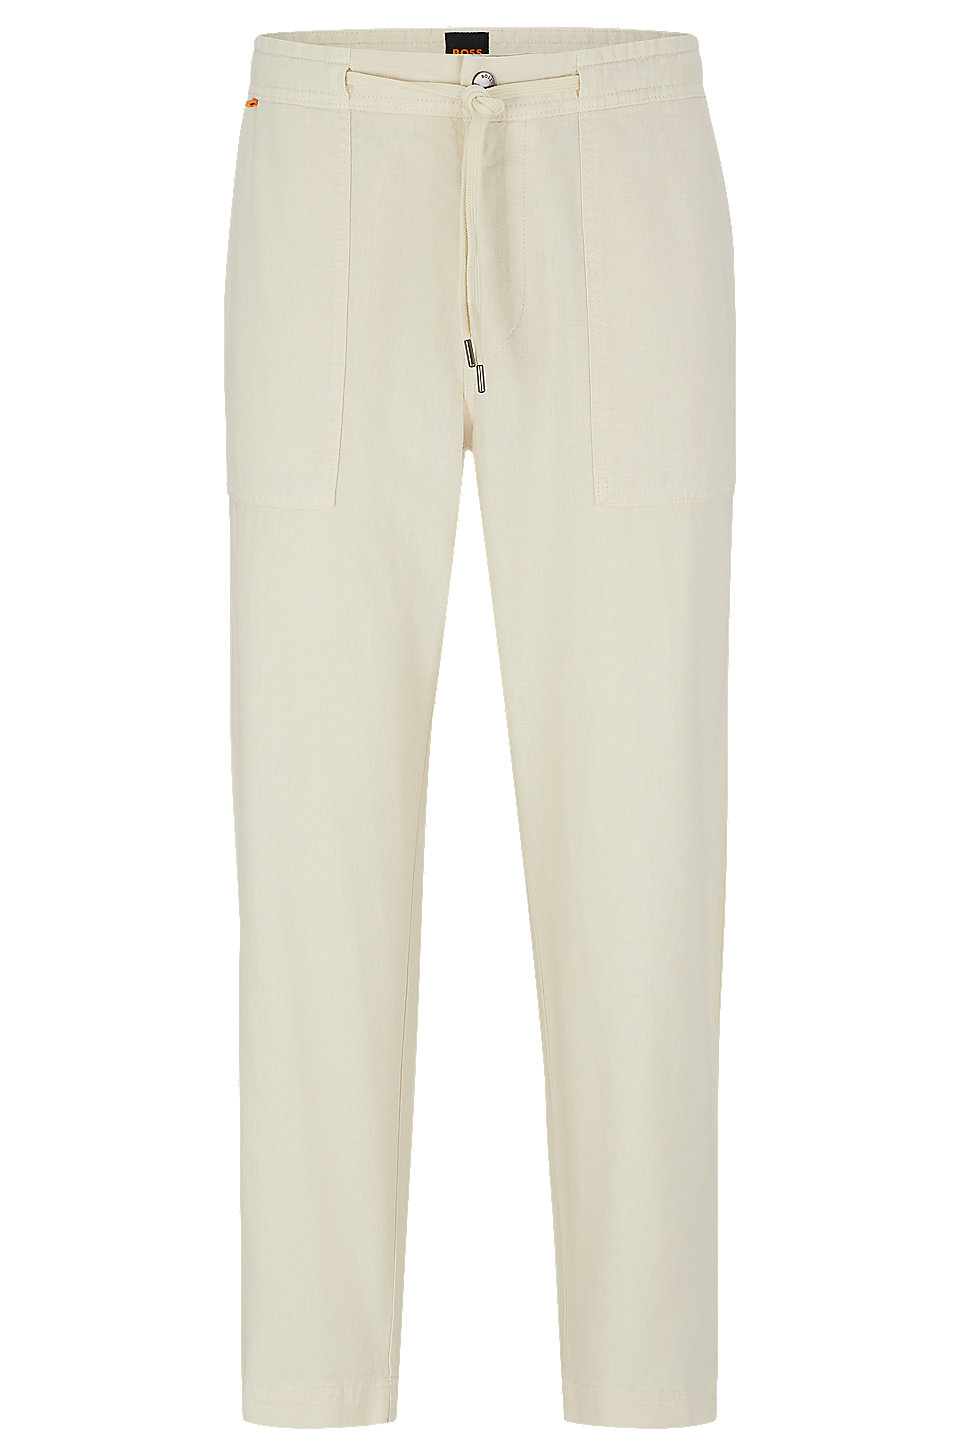 BOSS - Regular-fit trousers in linen and cotton